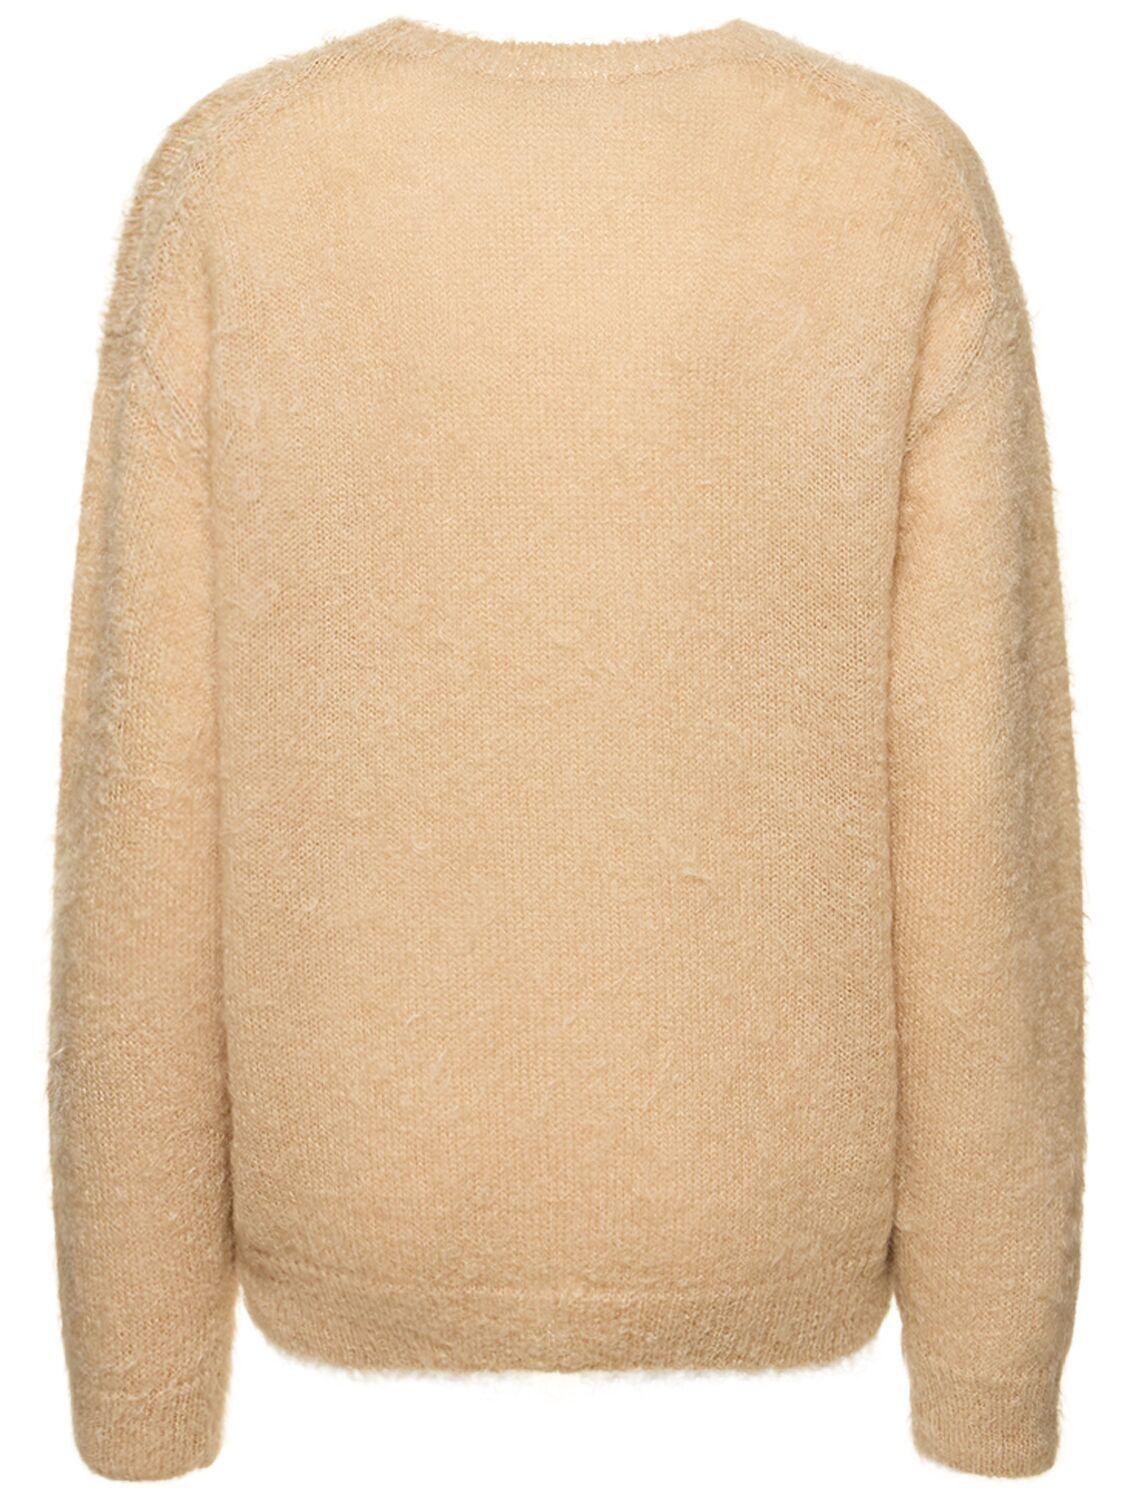 AURALEE Brushed Super Kid Mohair Knit Sweater in Natural | Lyst